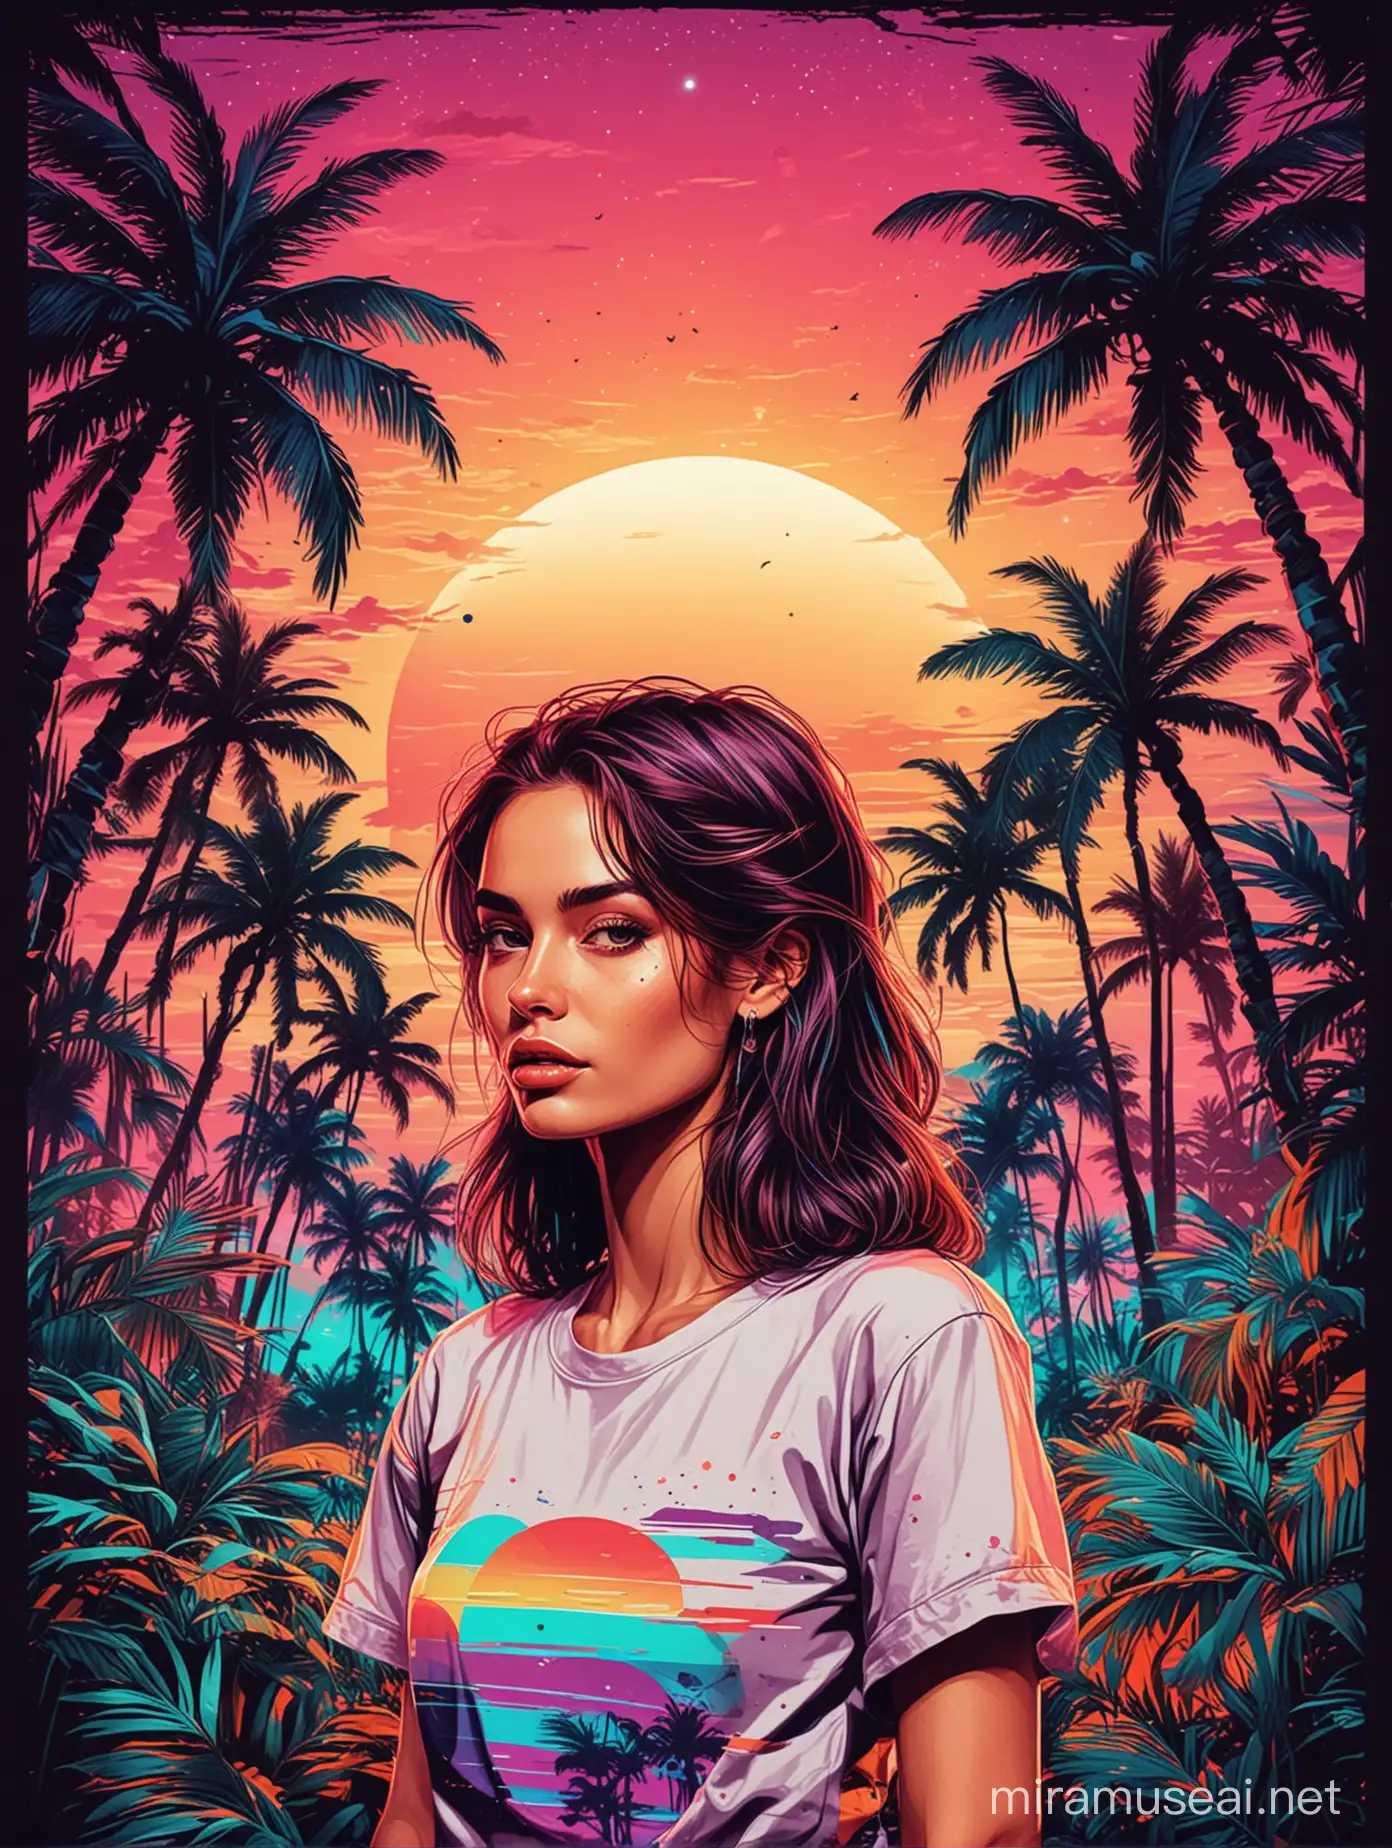 Woman with Bold Neon Tshirt Surrounded by Tropical Palm Trees and Planetary Sky